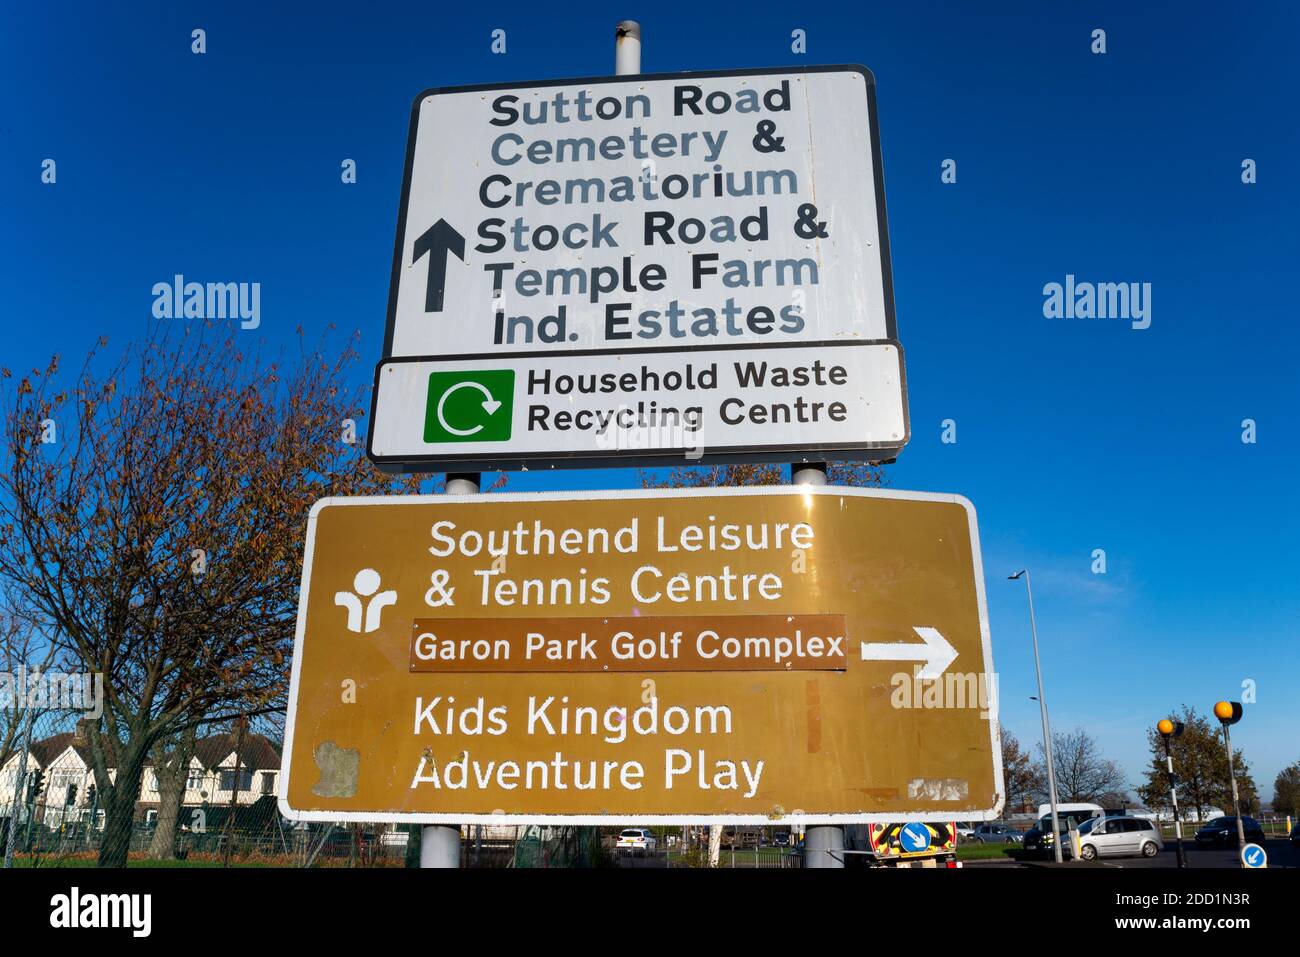 Road sign for Sutton Road, cemetery, crematorium, Stock Road, Temple Farm Industrial Estate, Household waste recycling centre Stock Photo